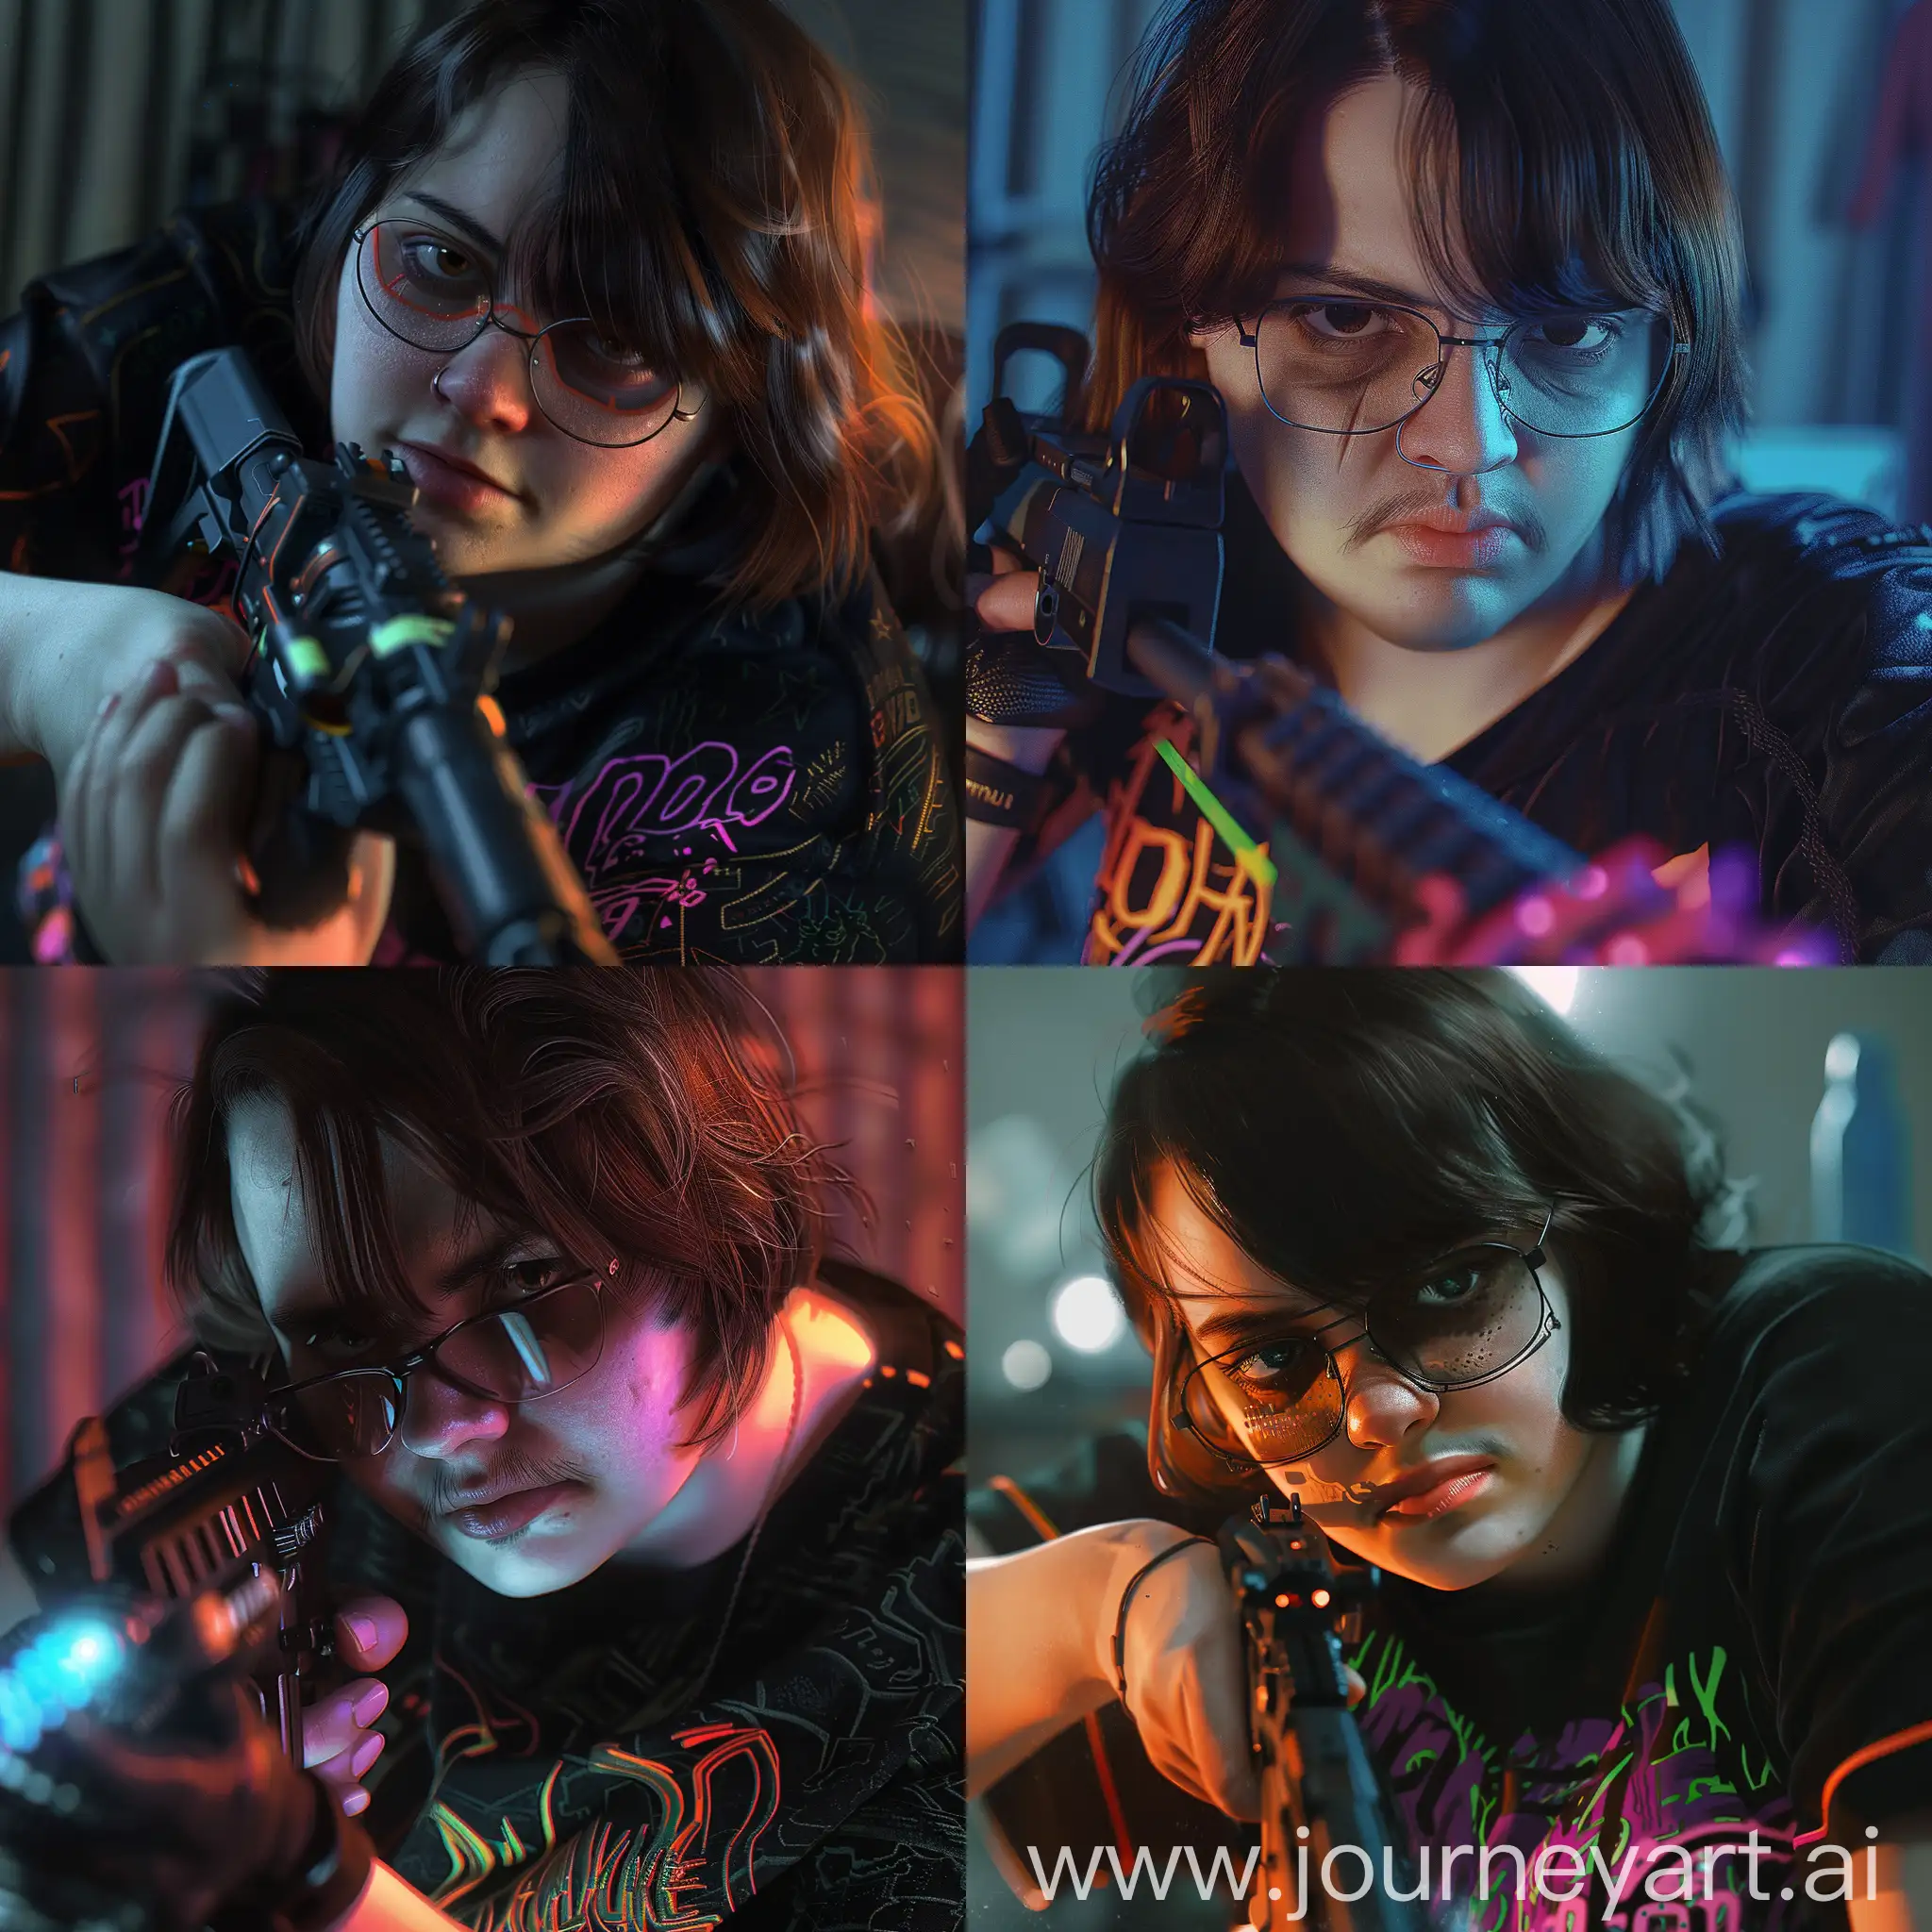 Sharpshooter-in-Action-Intense-Face-Closeup-in-Hyperrealistic-Digital-Art